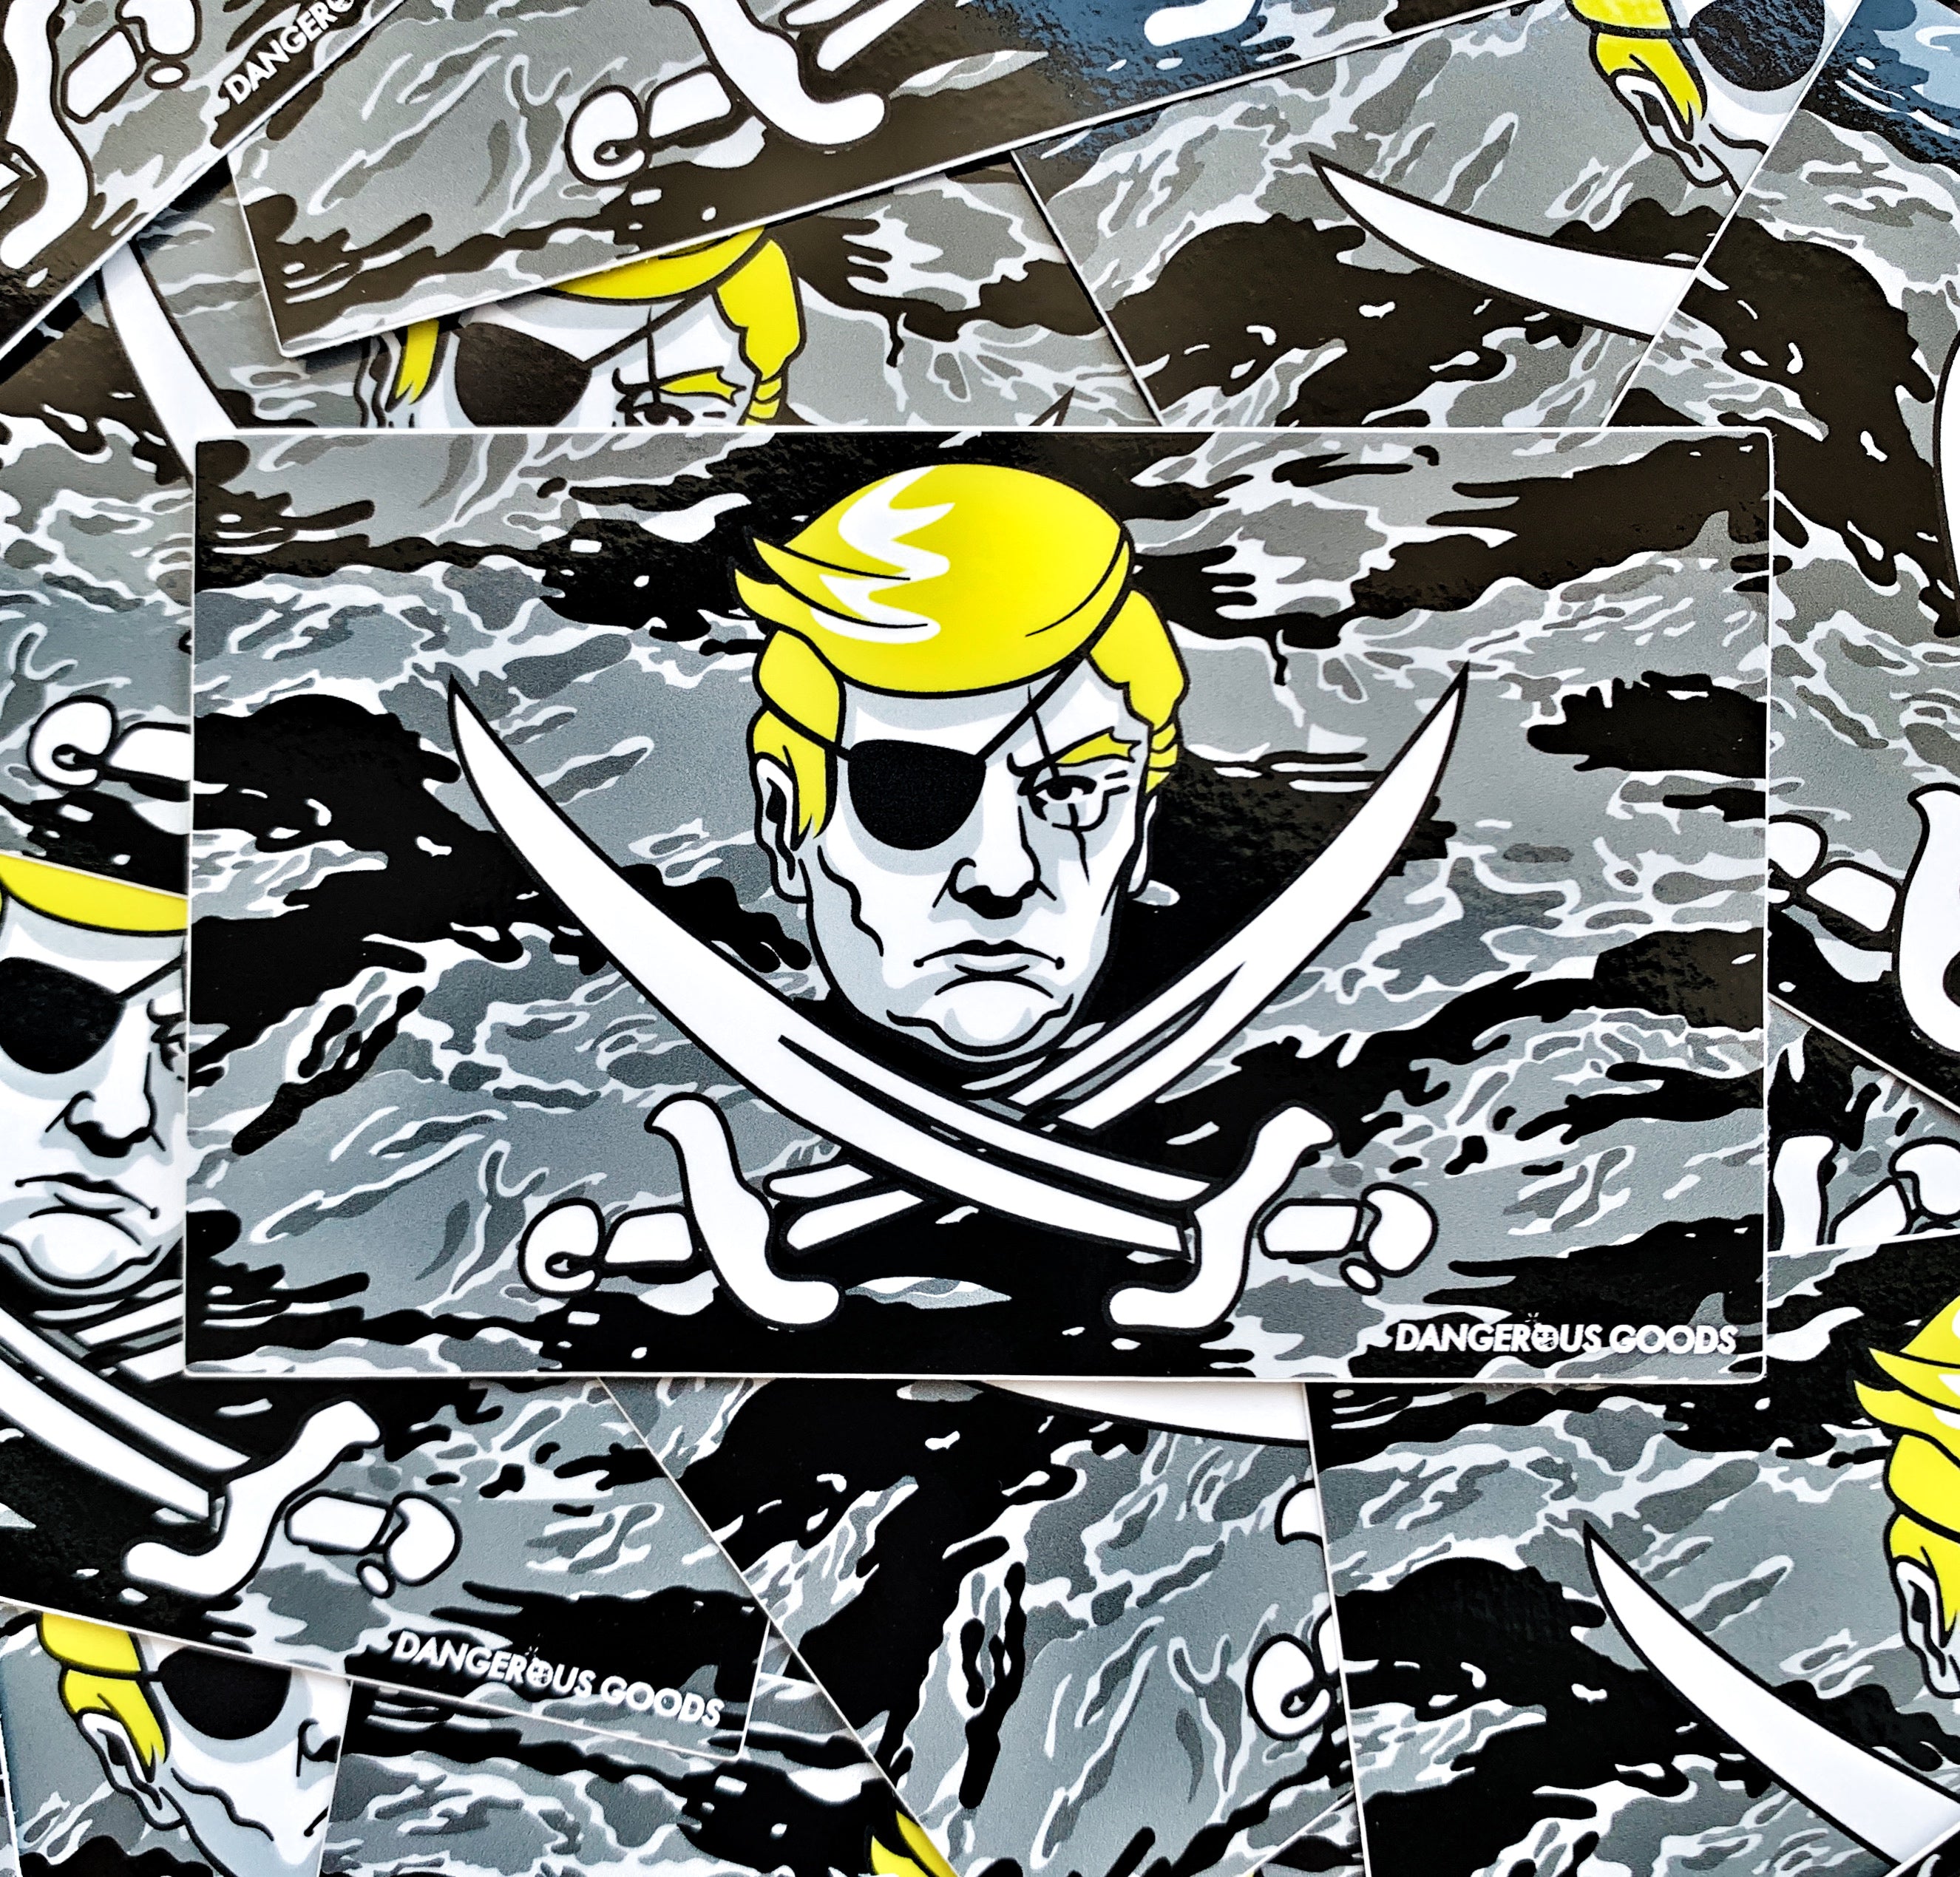 Black and grey tiger stripe camo style flag sticker depicting a cartoon image of trumps head with two crossing pirate swords underneath 